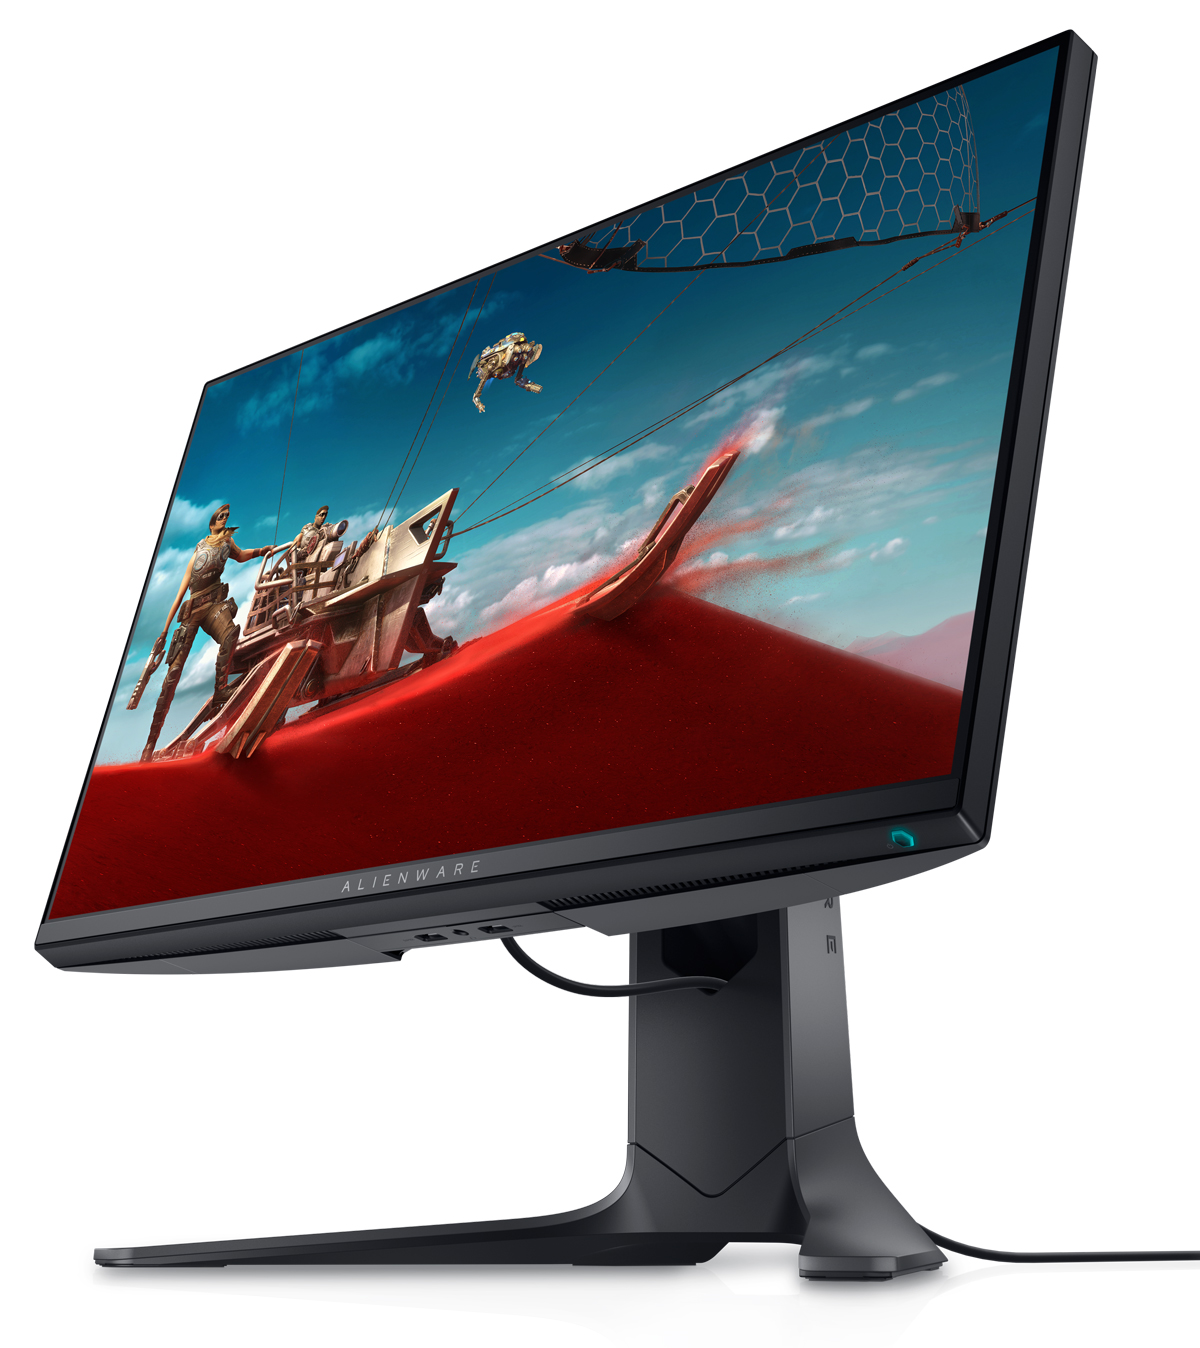 The Alienware 25 Gaming Monitor